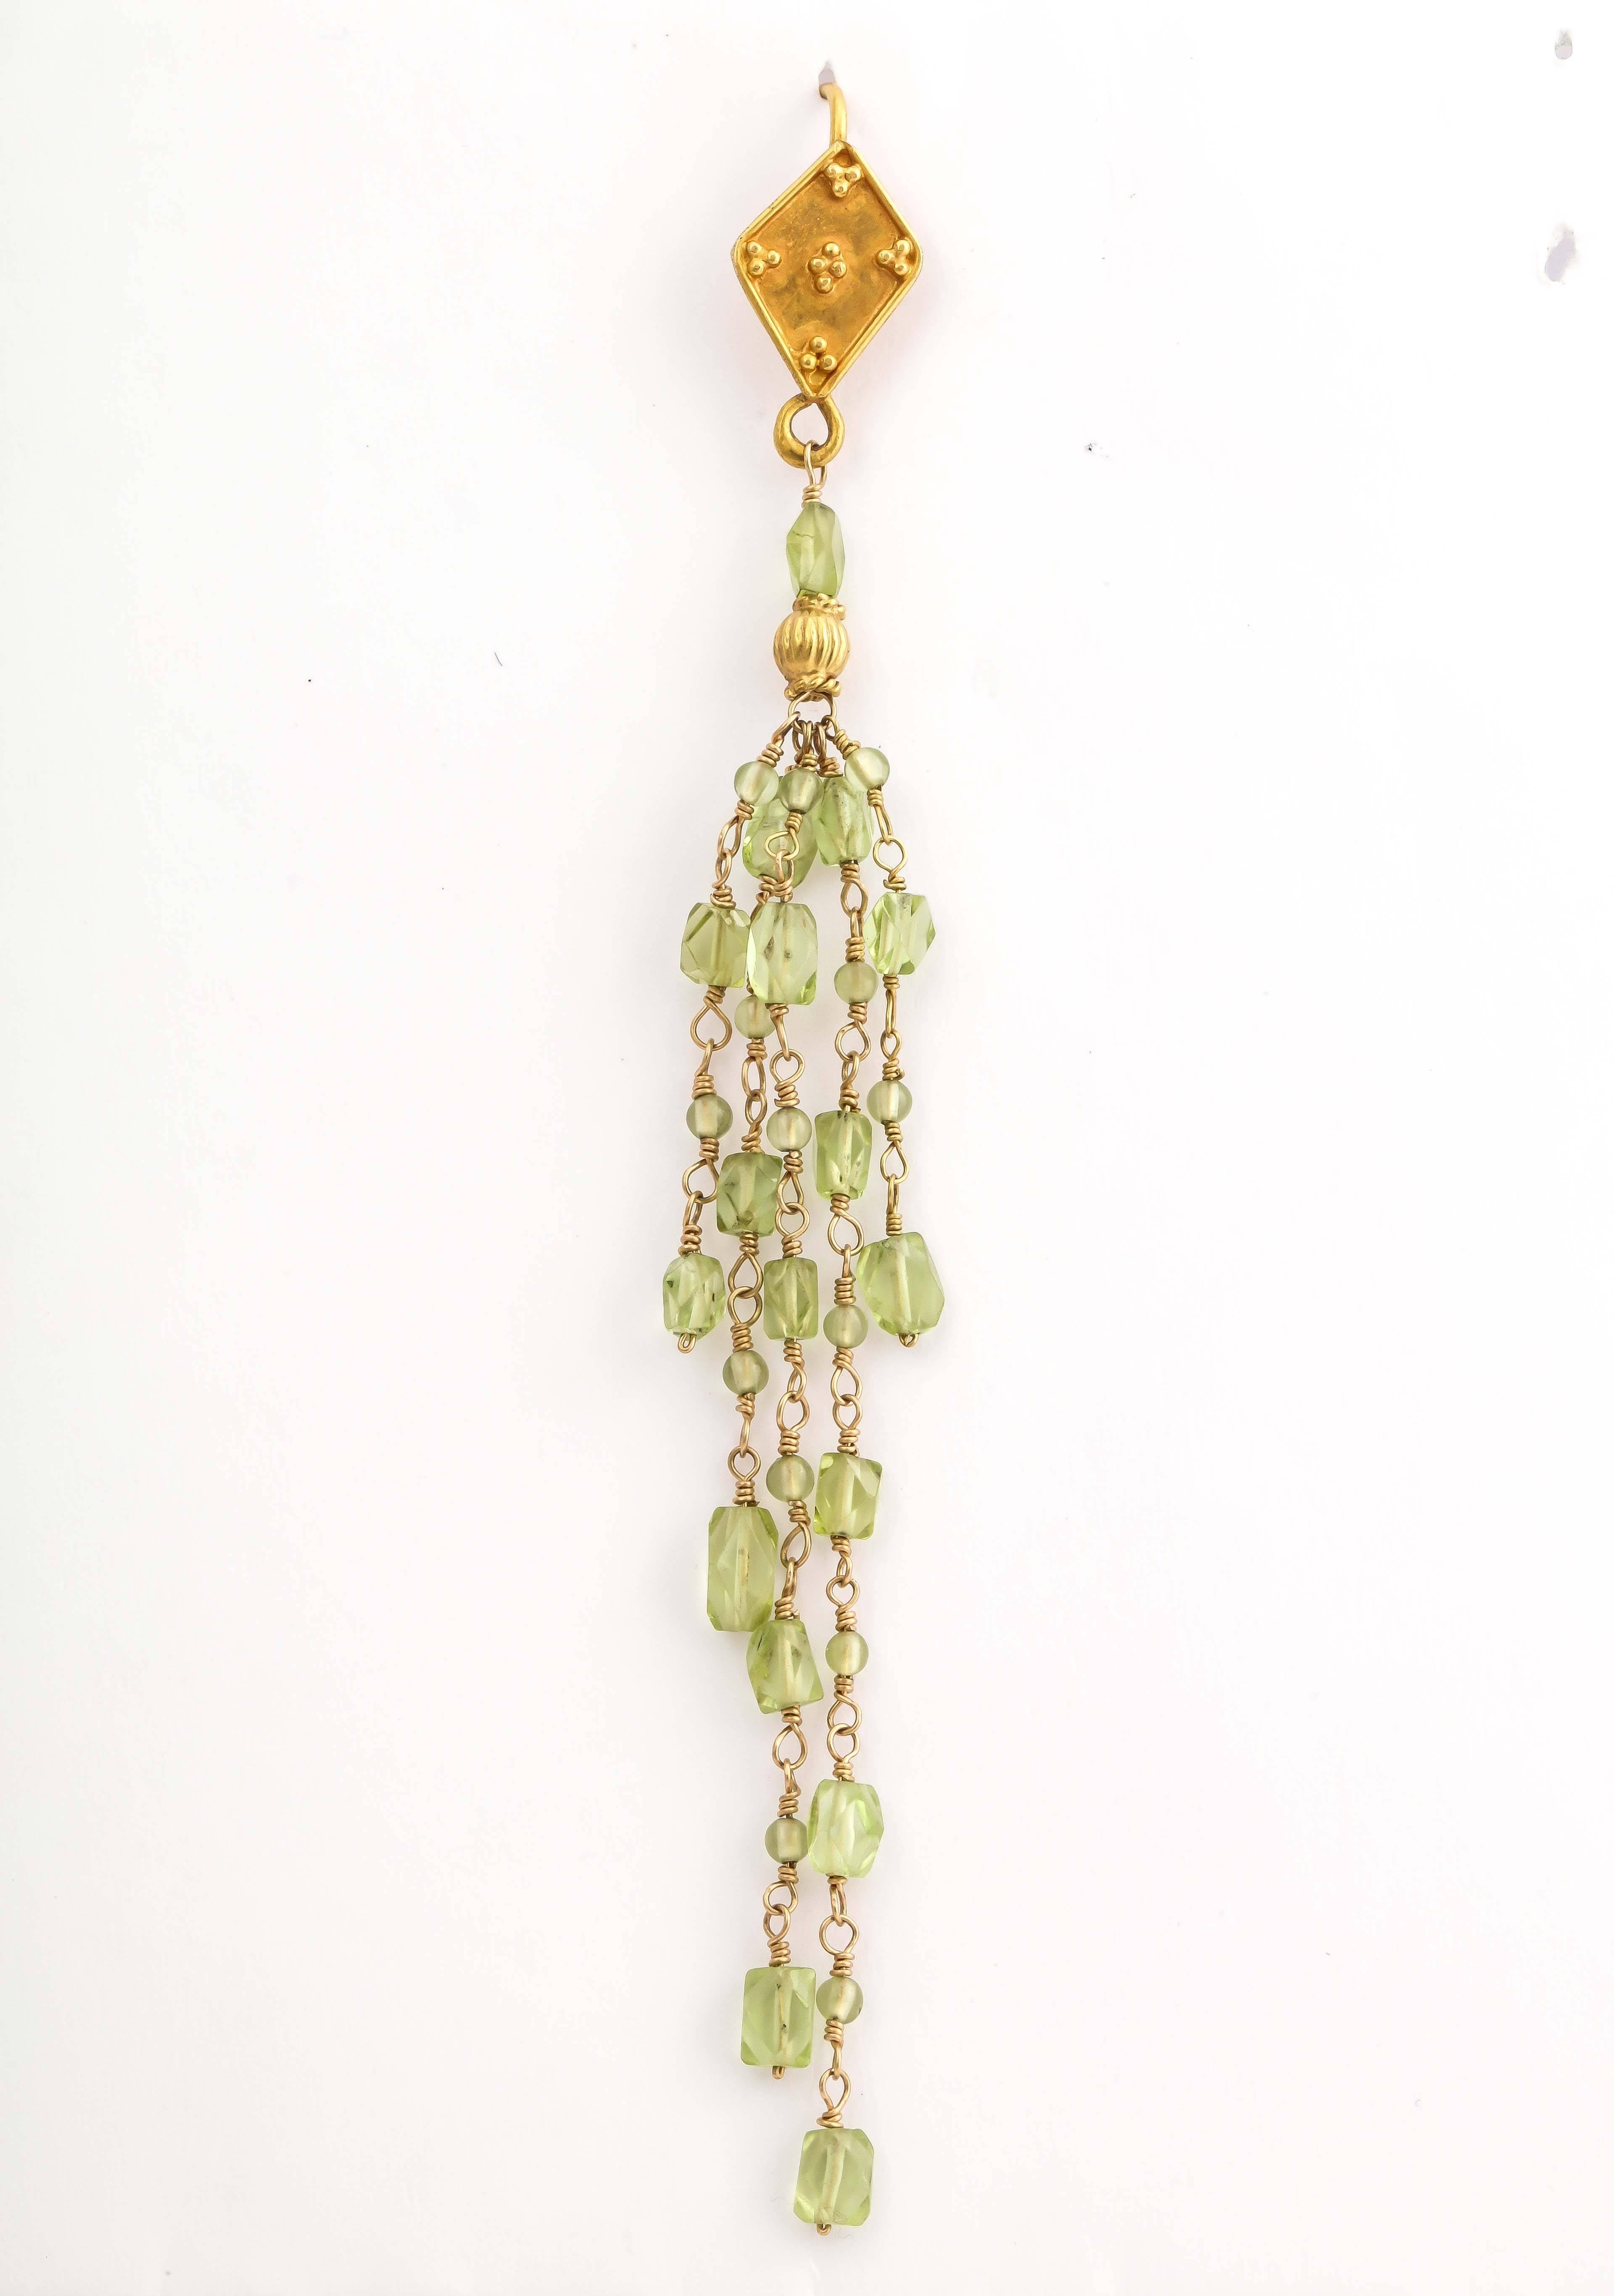 Four inch long, elegant and classical wire wrapped peridot bead earrings. The top is granulated with gold beads and the earring hangs from kidney shaped ear wires. Great earrings for day or evening. You will look like a greek goddess.